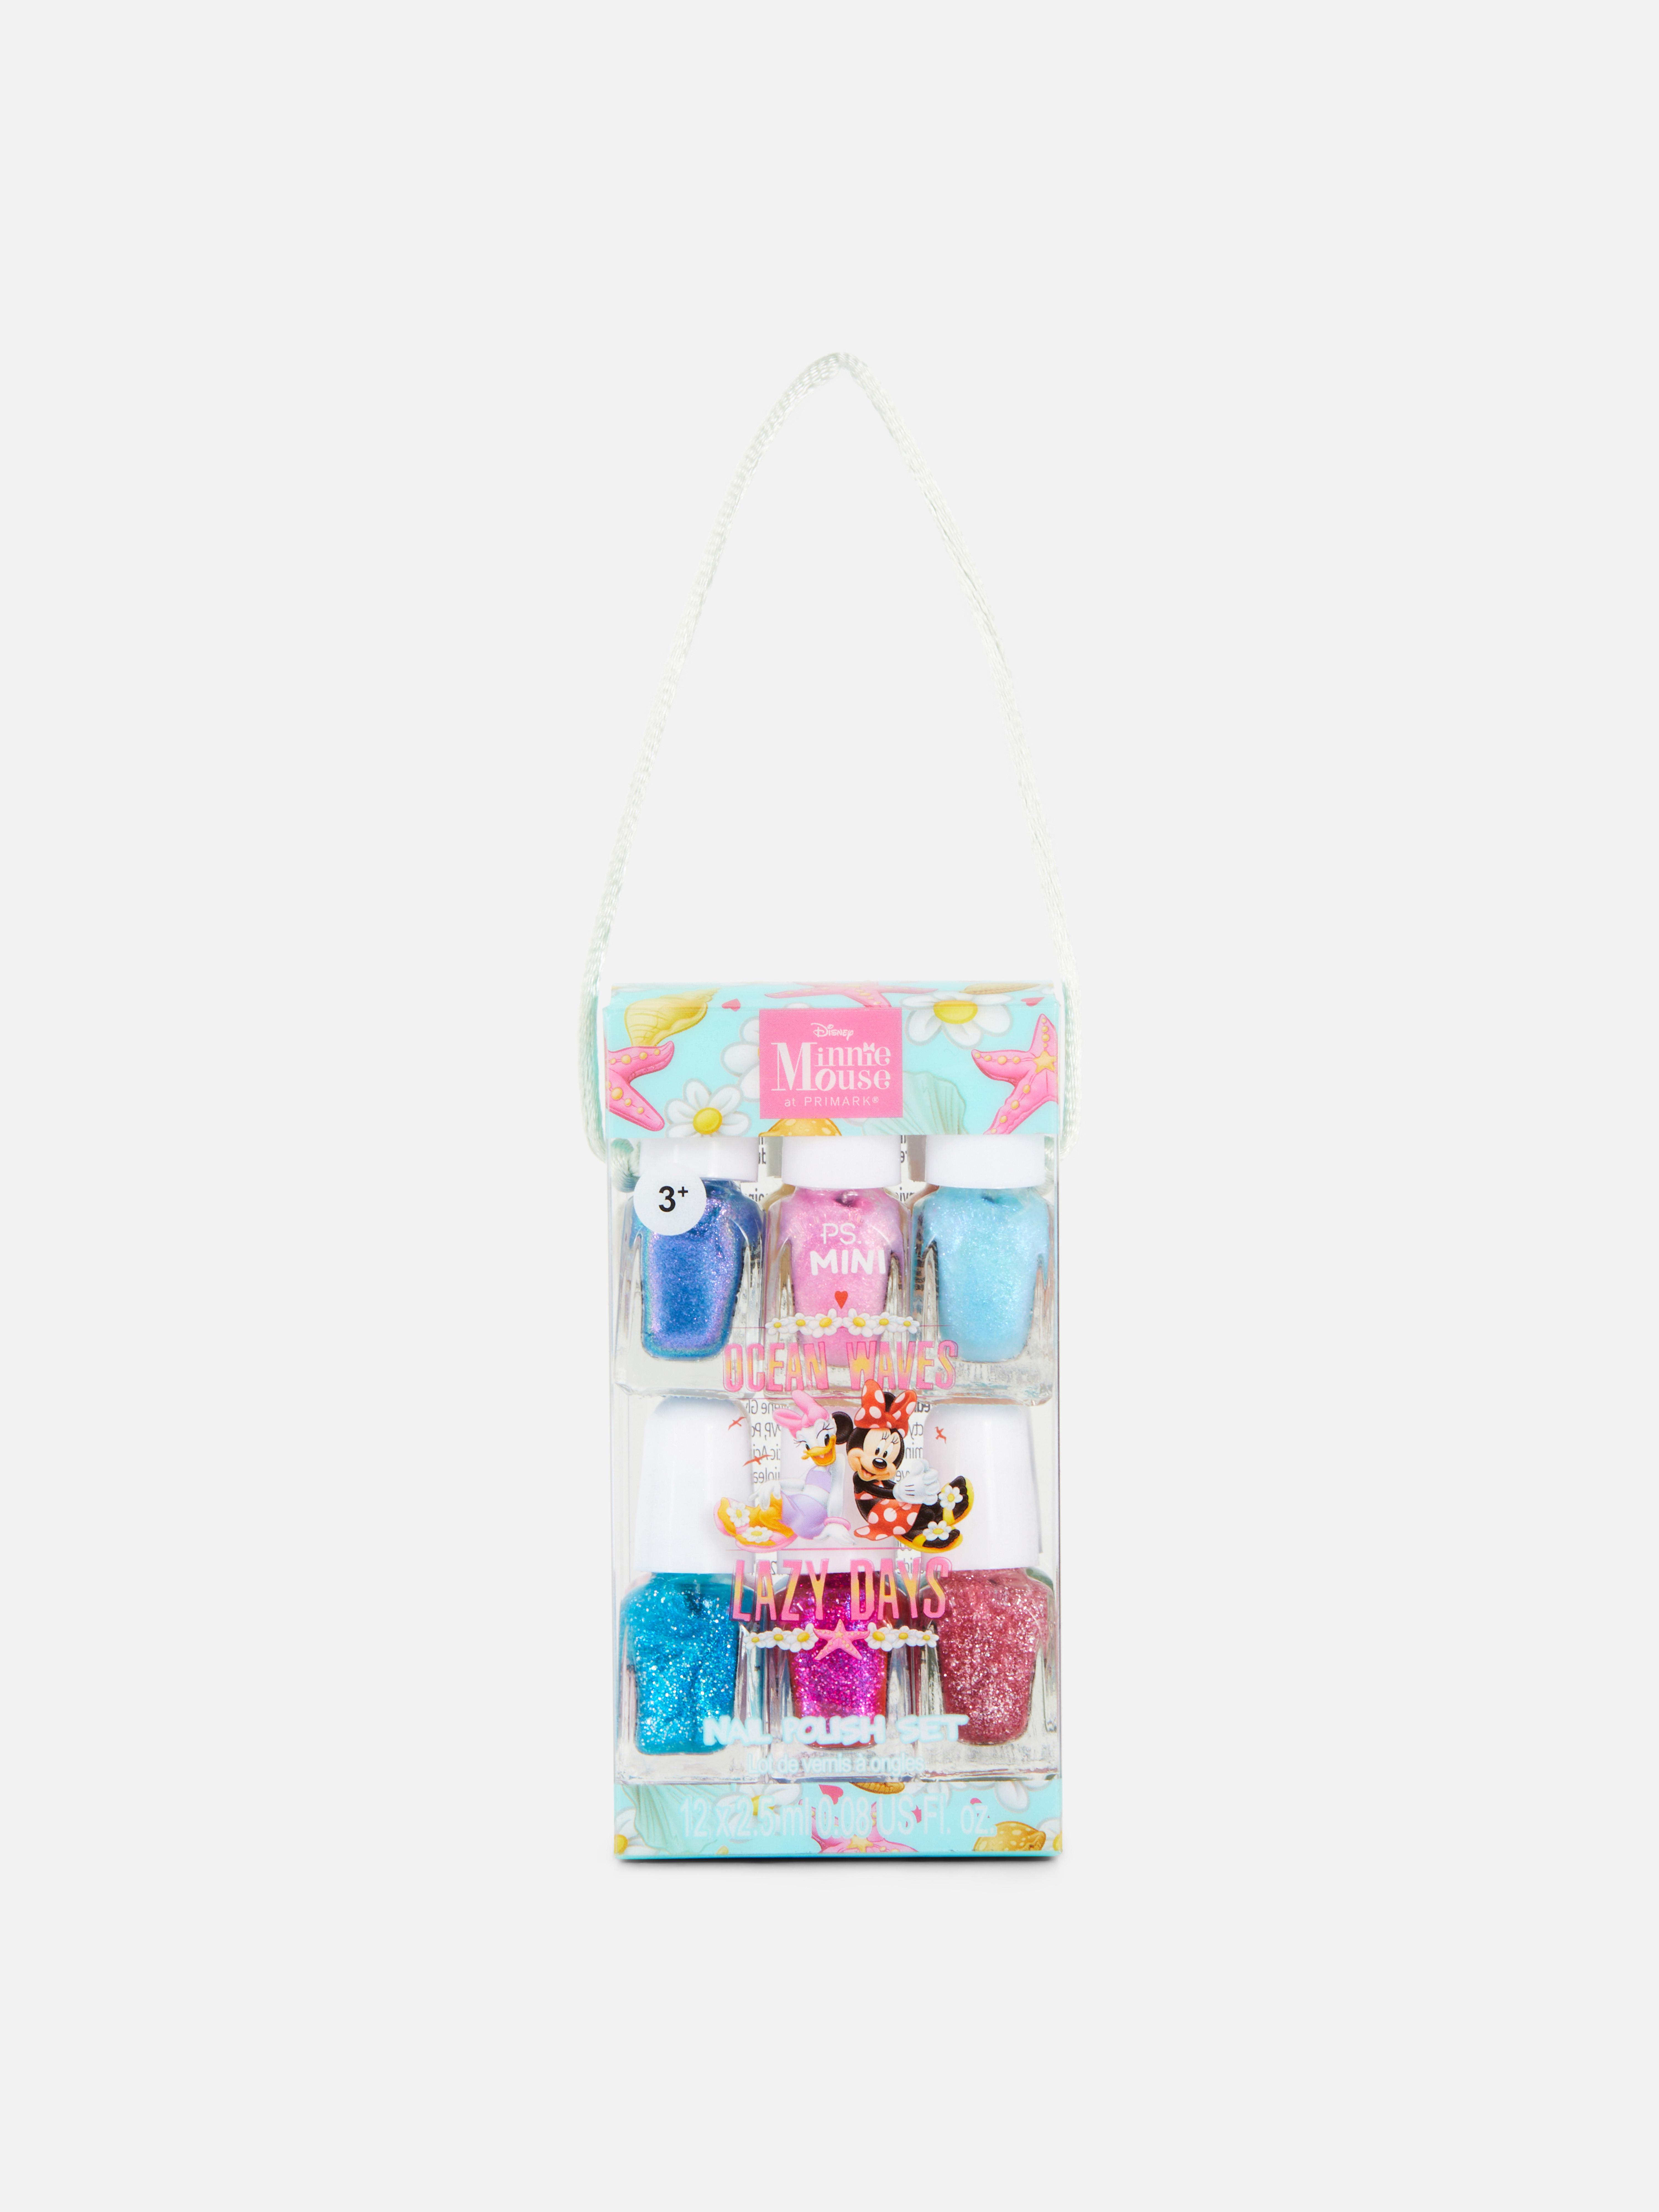 12-Pack PS Mini Disney’s Minnie Mouse and Daisy Duck Nail Polishes